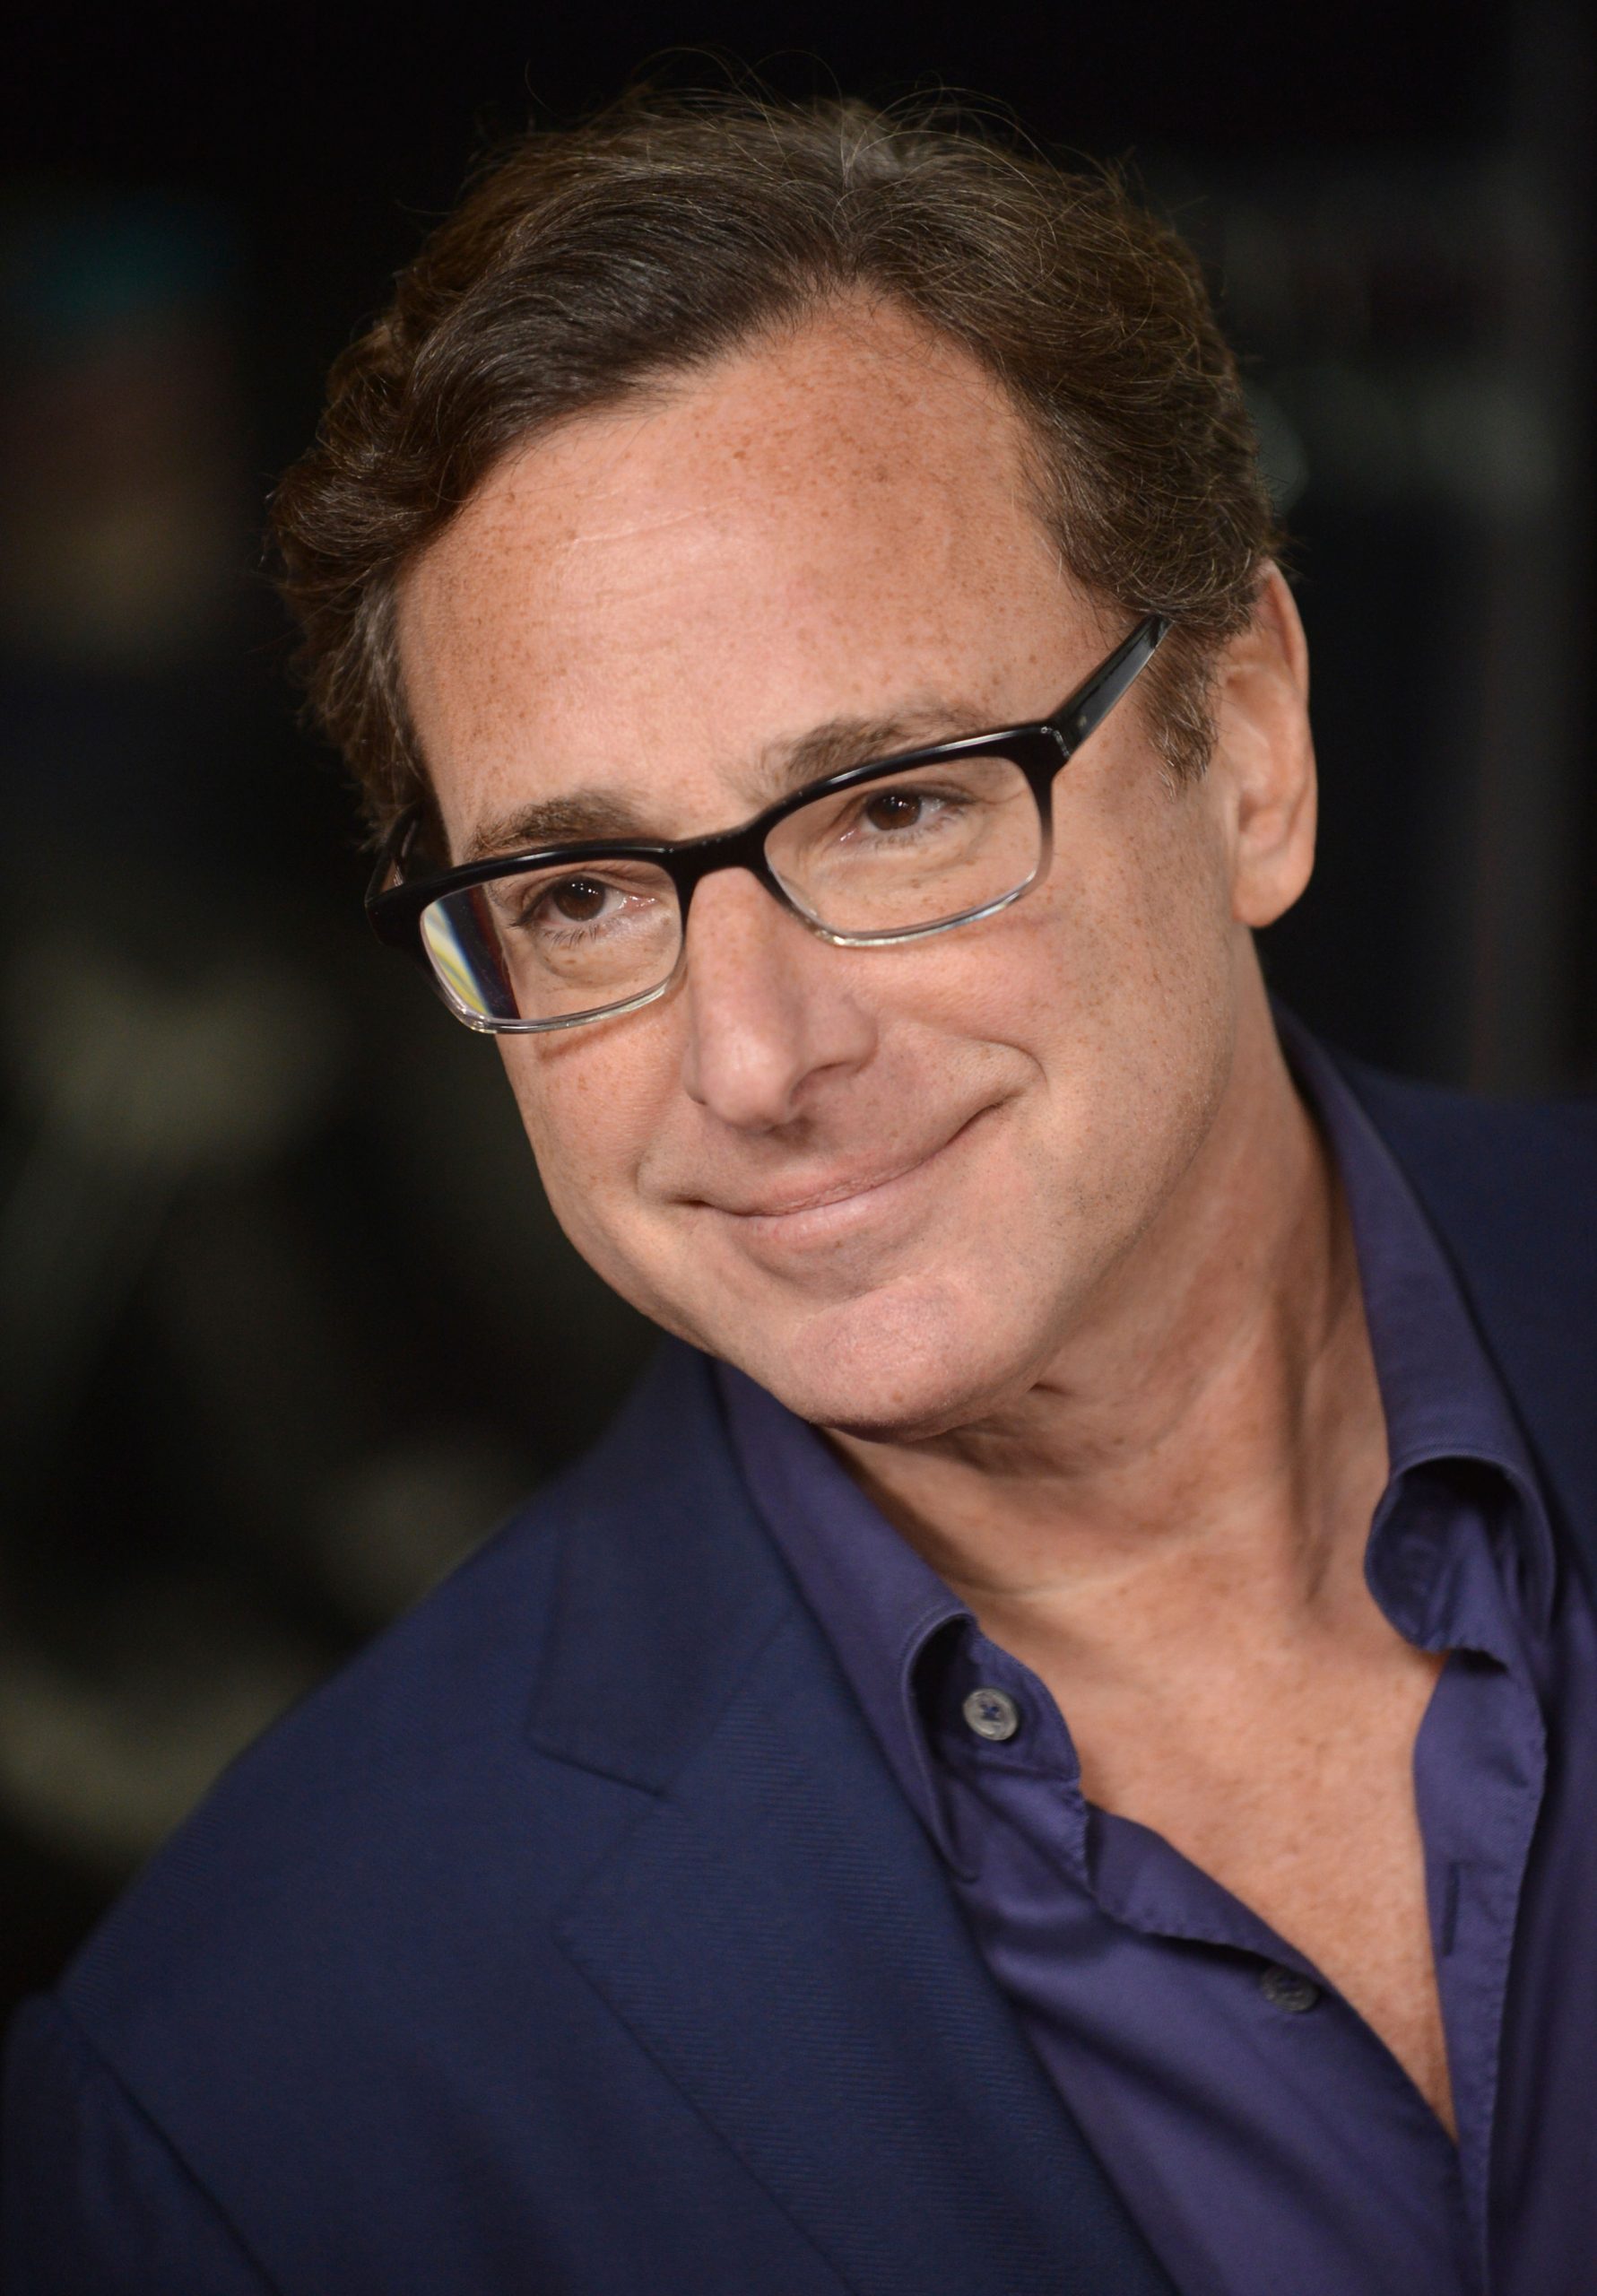 Bob Saget’s injuries possibly by fall on carpeted floor, says autopsy report